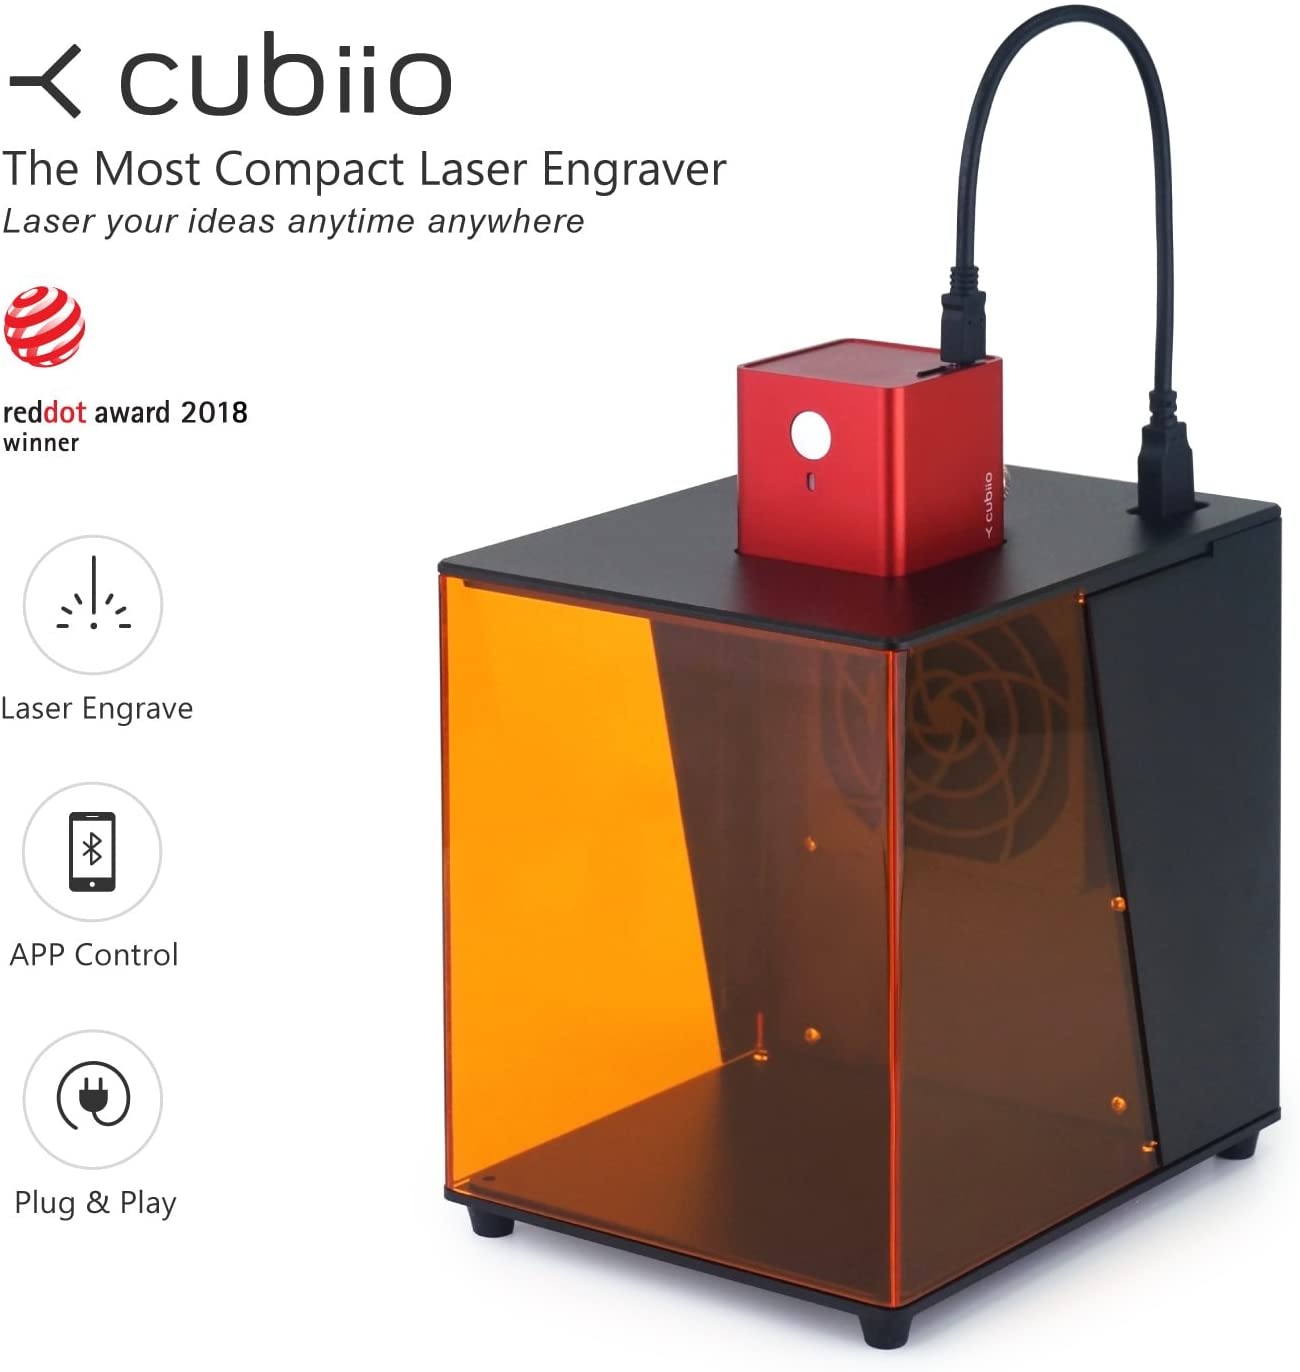 The Cubiio - The insane gadget for your next gift idea